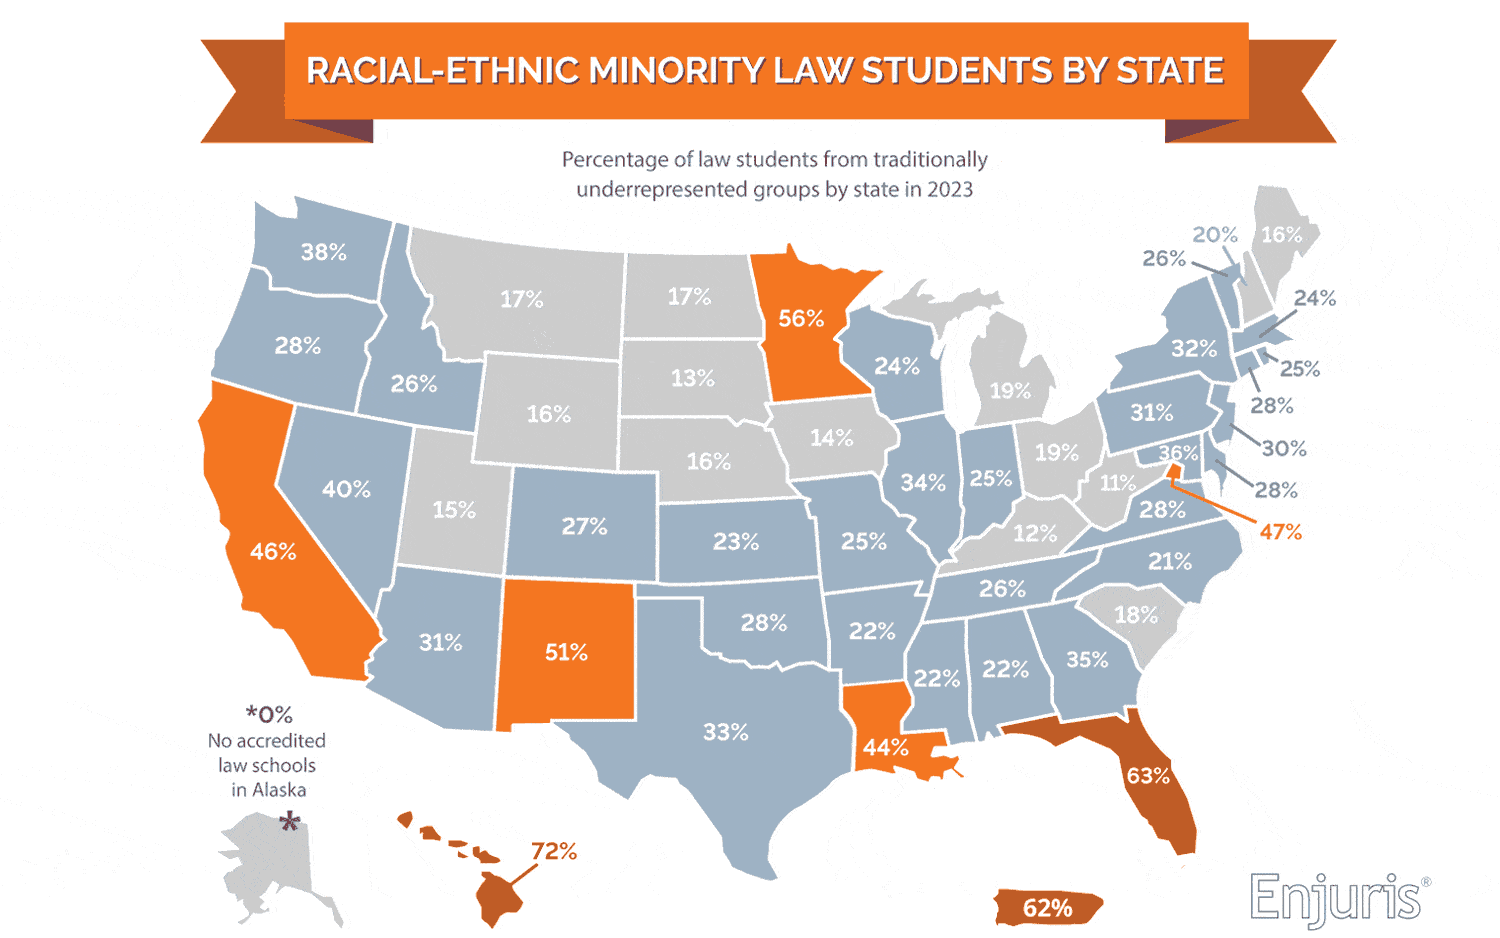 Law school race & ethnicity composition in 2023